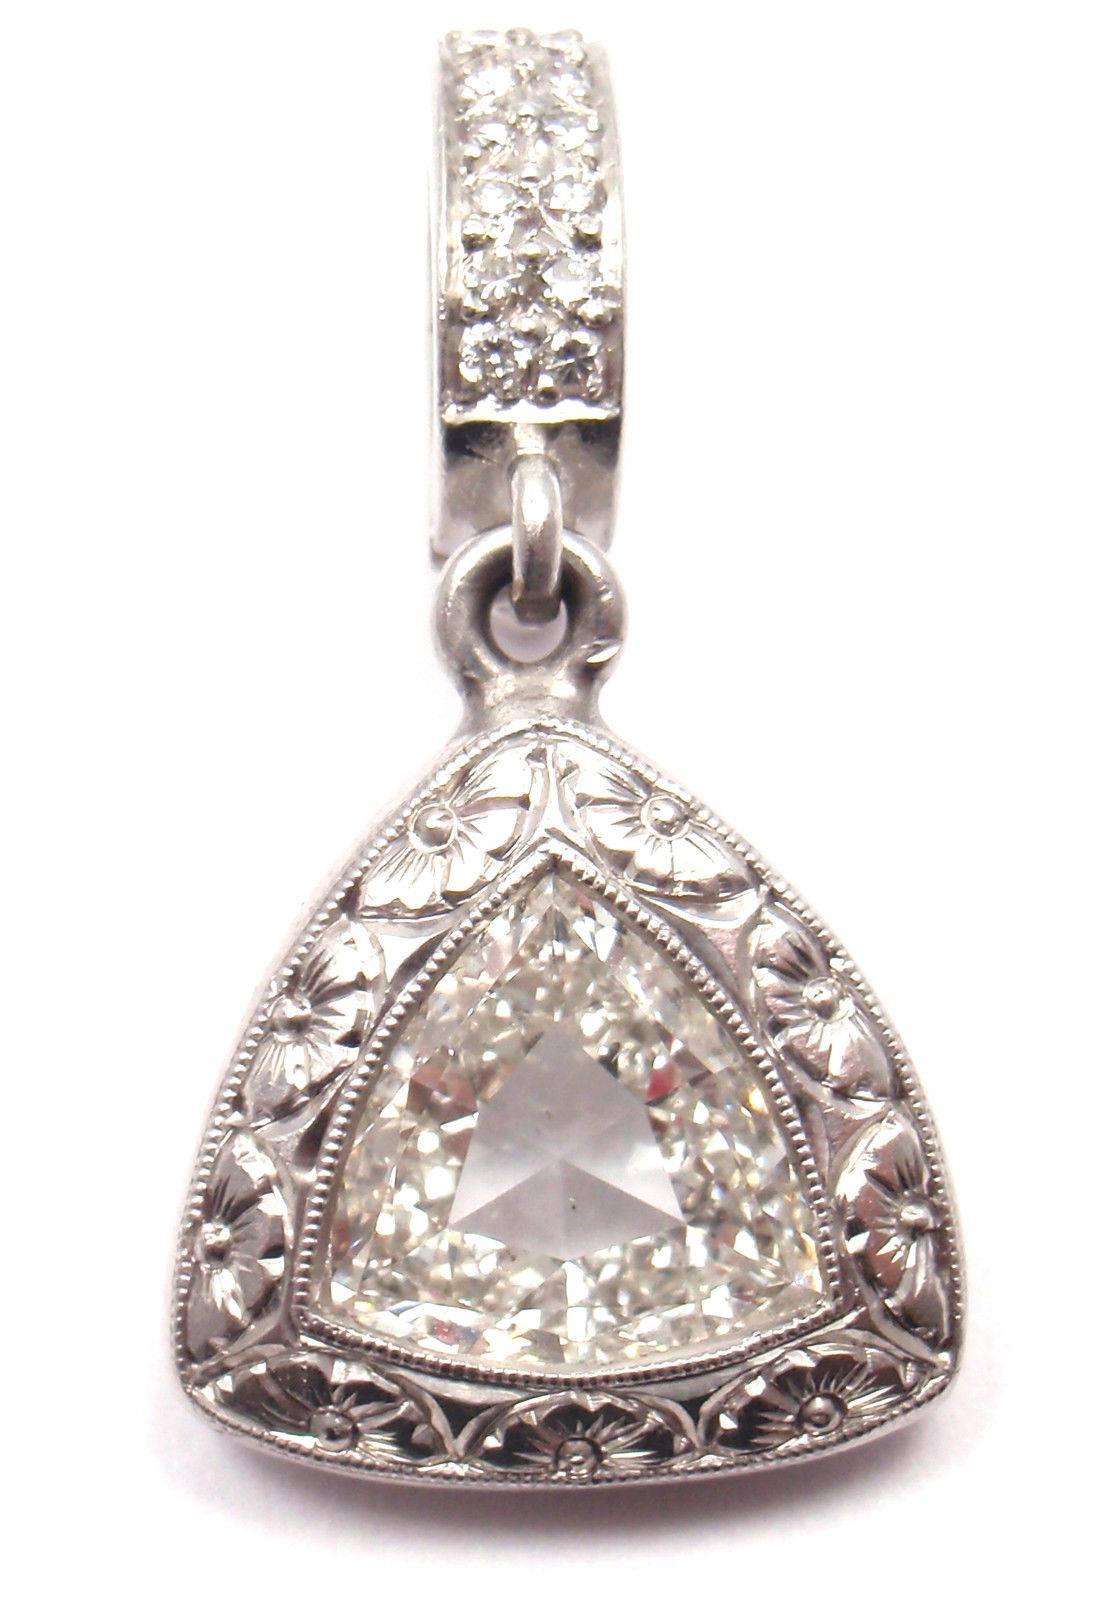 Platinum 2.30ct Center Tringle Shape Diamond Enhancer Pendant 
by Loree Rodkin.
With 1 Triangle shape large diamond SI1 clarity, H-I color total weight  
                           approx. 2.30ct and 14 round diamonds.

Details:
Measurements: